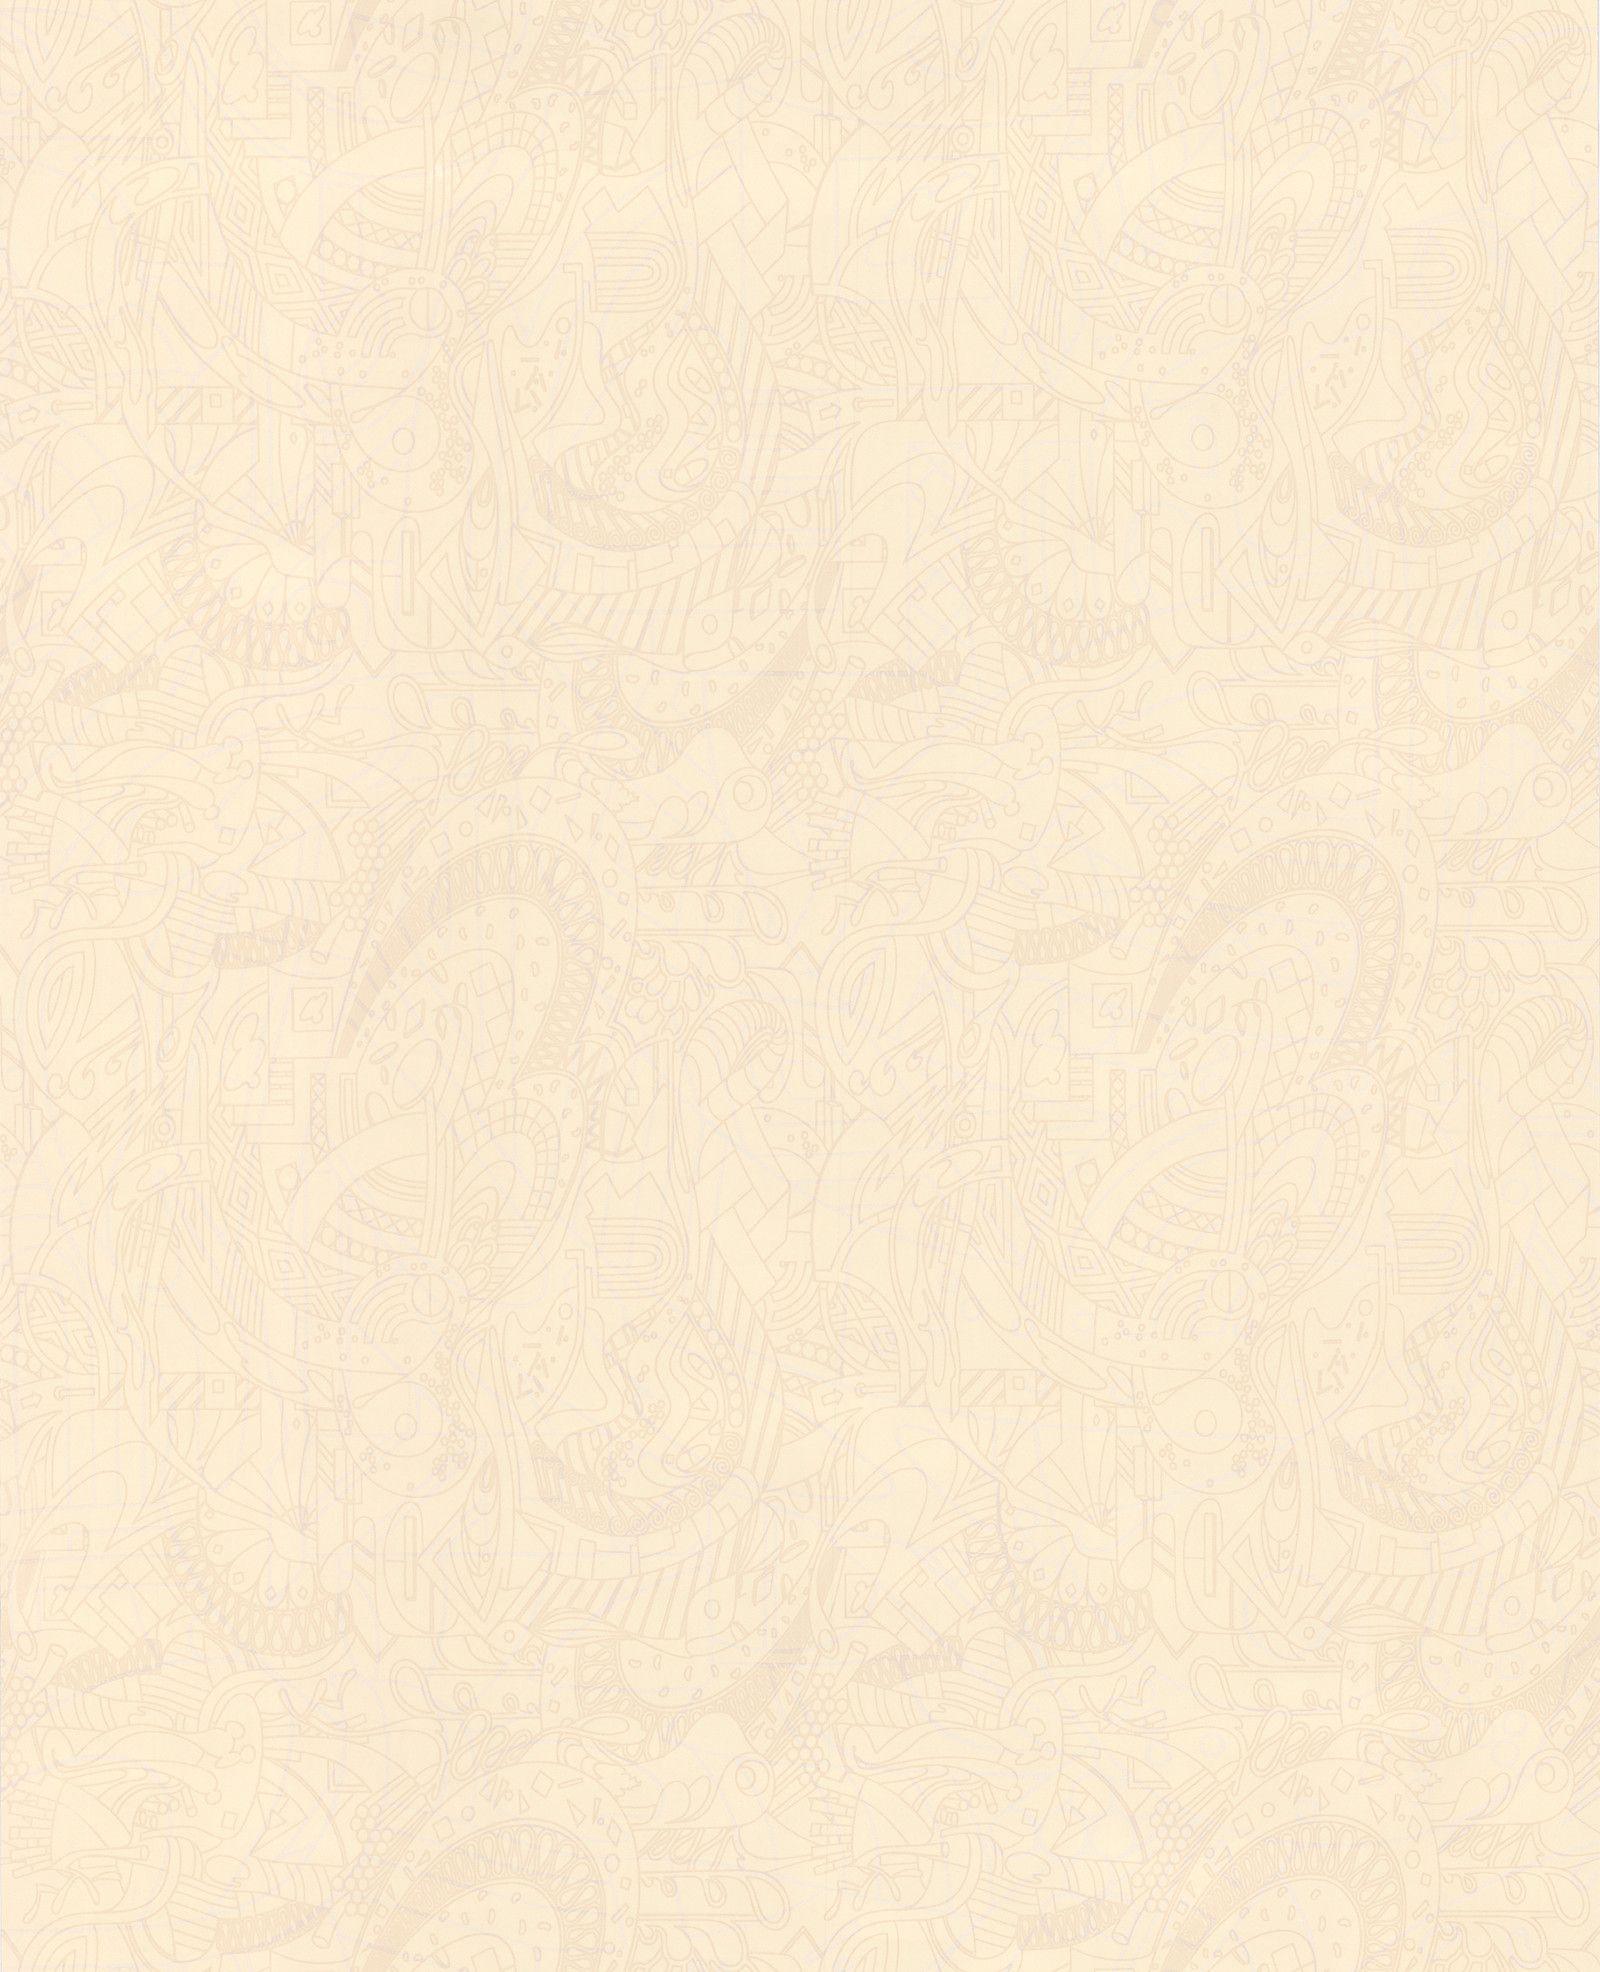 Download Free 100 + cream colored backgrounds Wallpapers